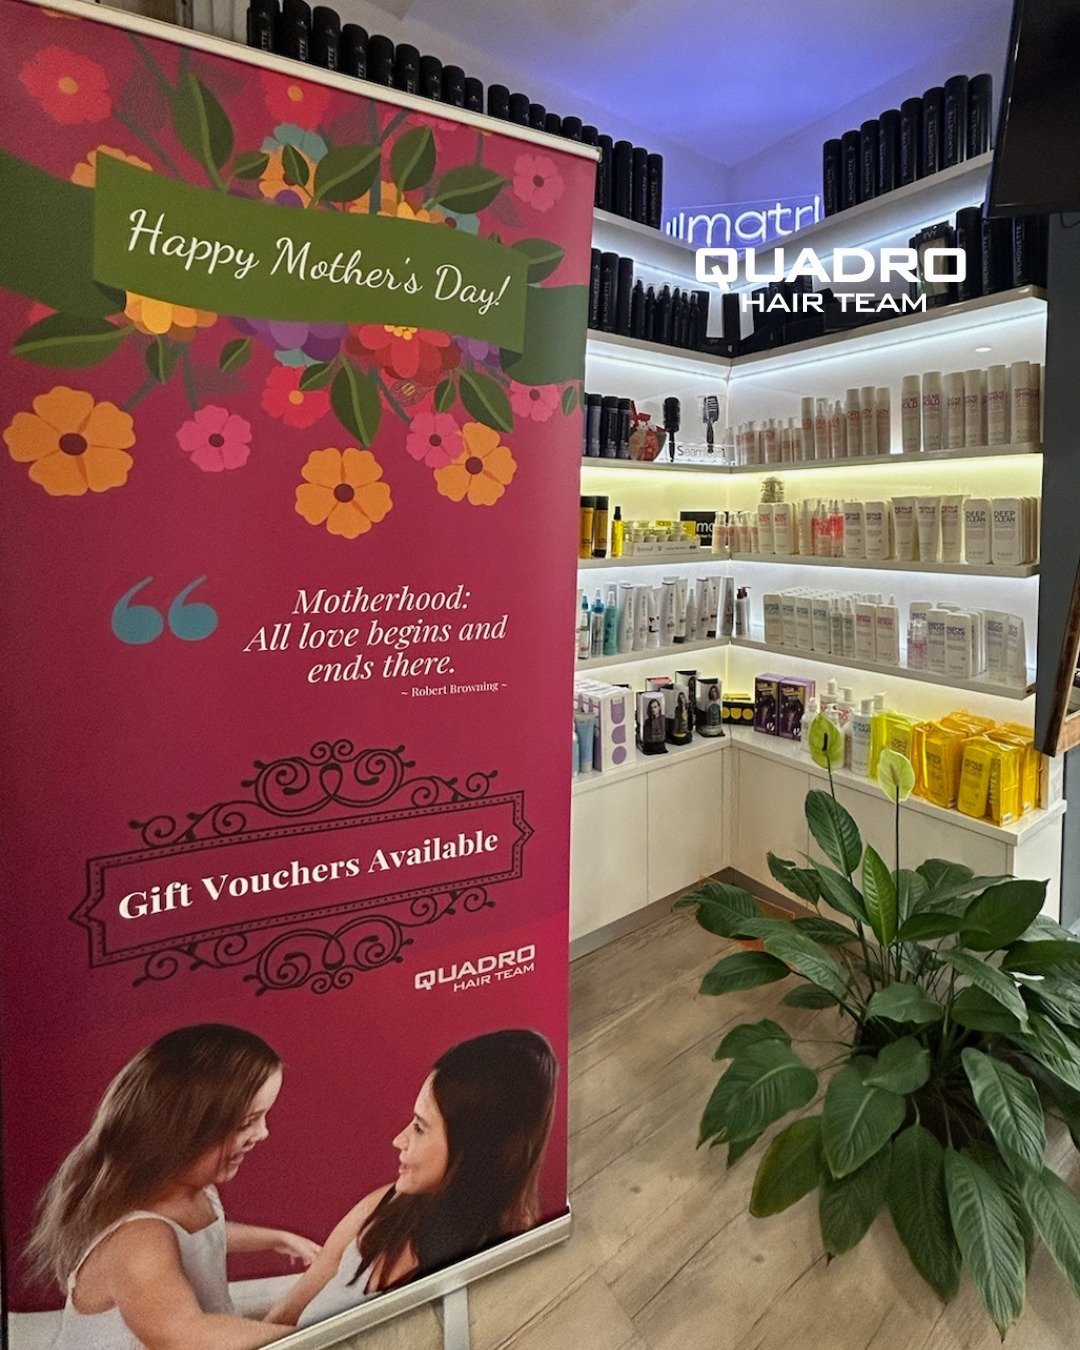 Sunday 12th May 💐 Treat Mum to a visit to Quadro !⁠
⁠
Fresh foils, special occasion hair, a conditioning treatment &amp; more. Gift vouchers available in salon, Monday to Saturday. ⁠
⁠
📞 9561 7822⁠
⁠
#quadrohairteam #wheelershillsalon #hairdresser 